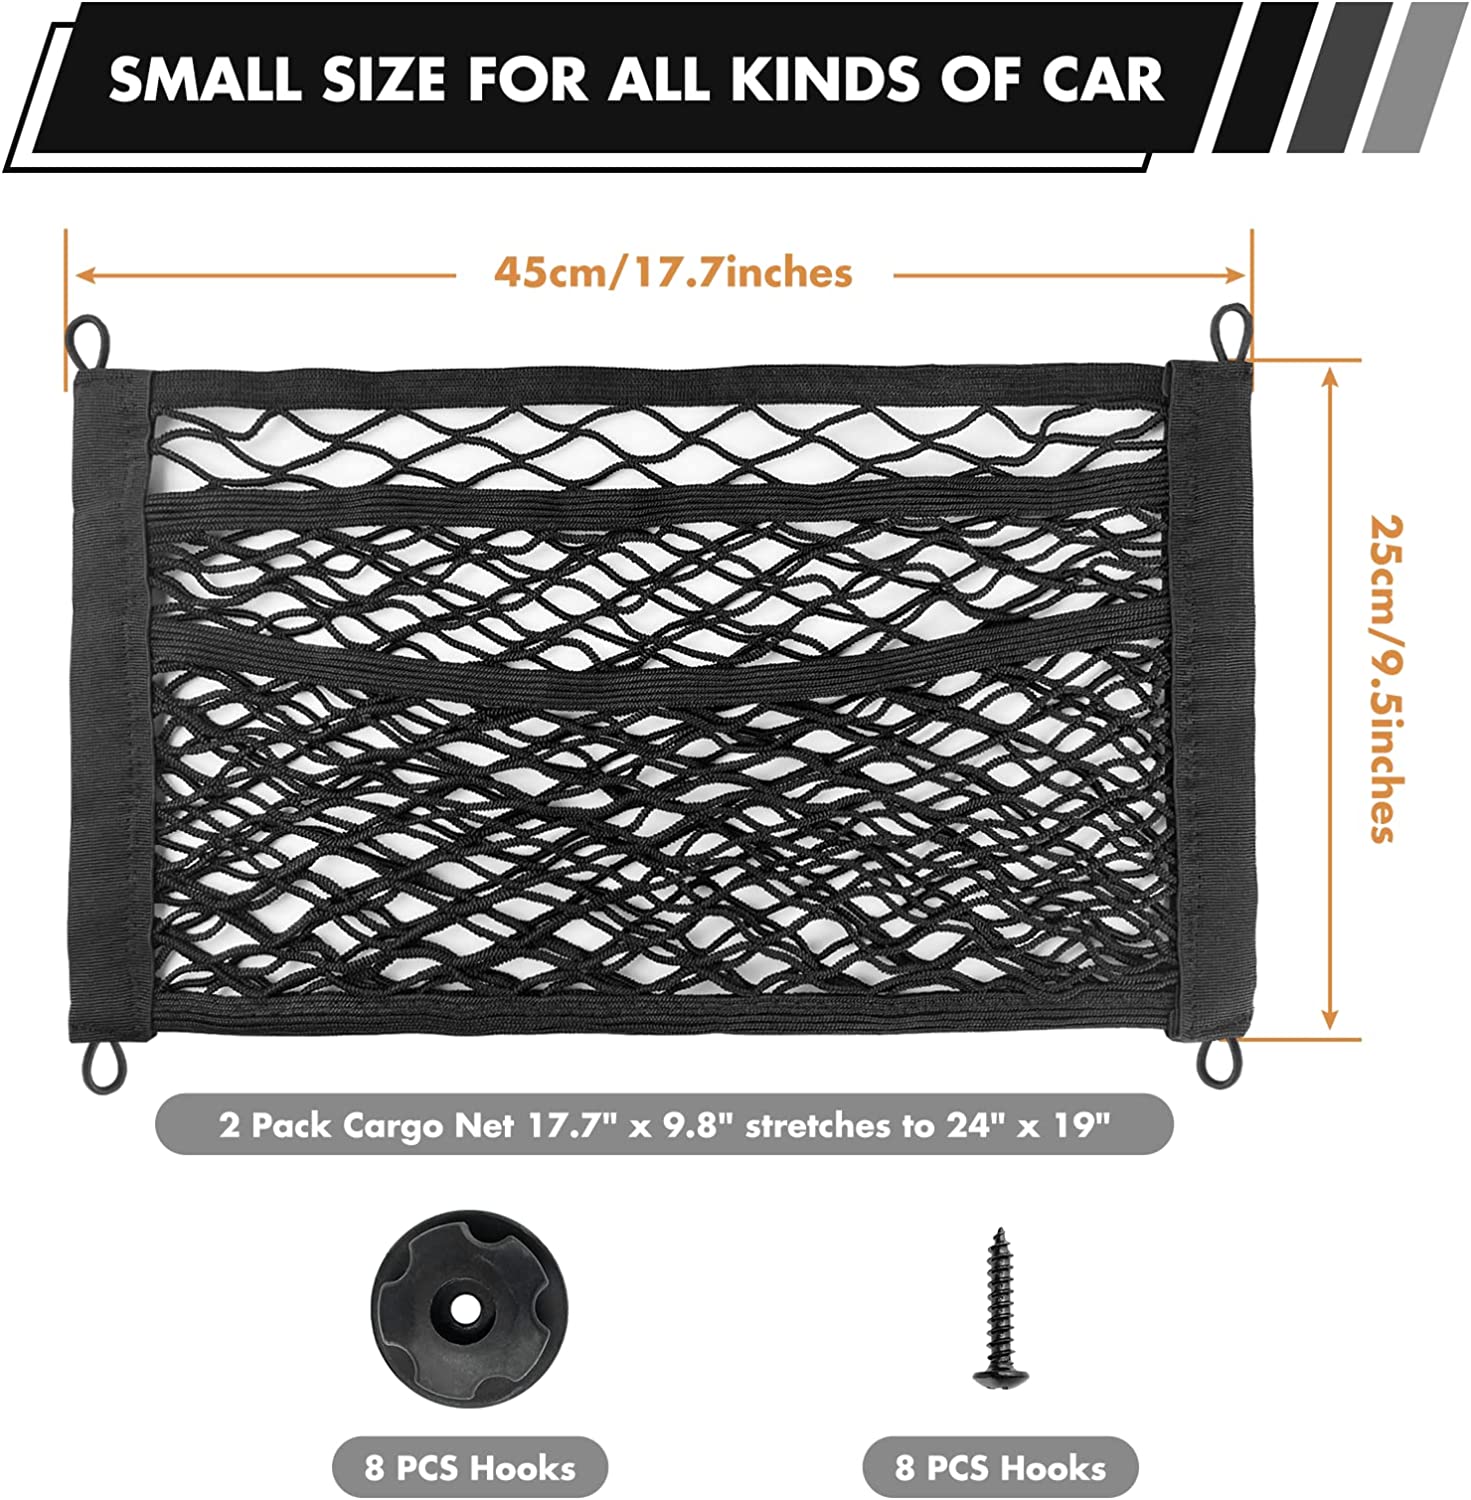 Cargo Net, Custom For Cars, 2 Pack Universal Mesh Cargo Net for Car Storage, Car-Net Pocket Storage Stretchable Mesh Pocket Net Wall Sticker Organizer Pouch Bag Storage Mesh Net for Car, Trunk, RV, Boats, Home - Delicate Leather